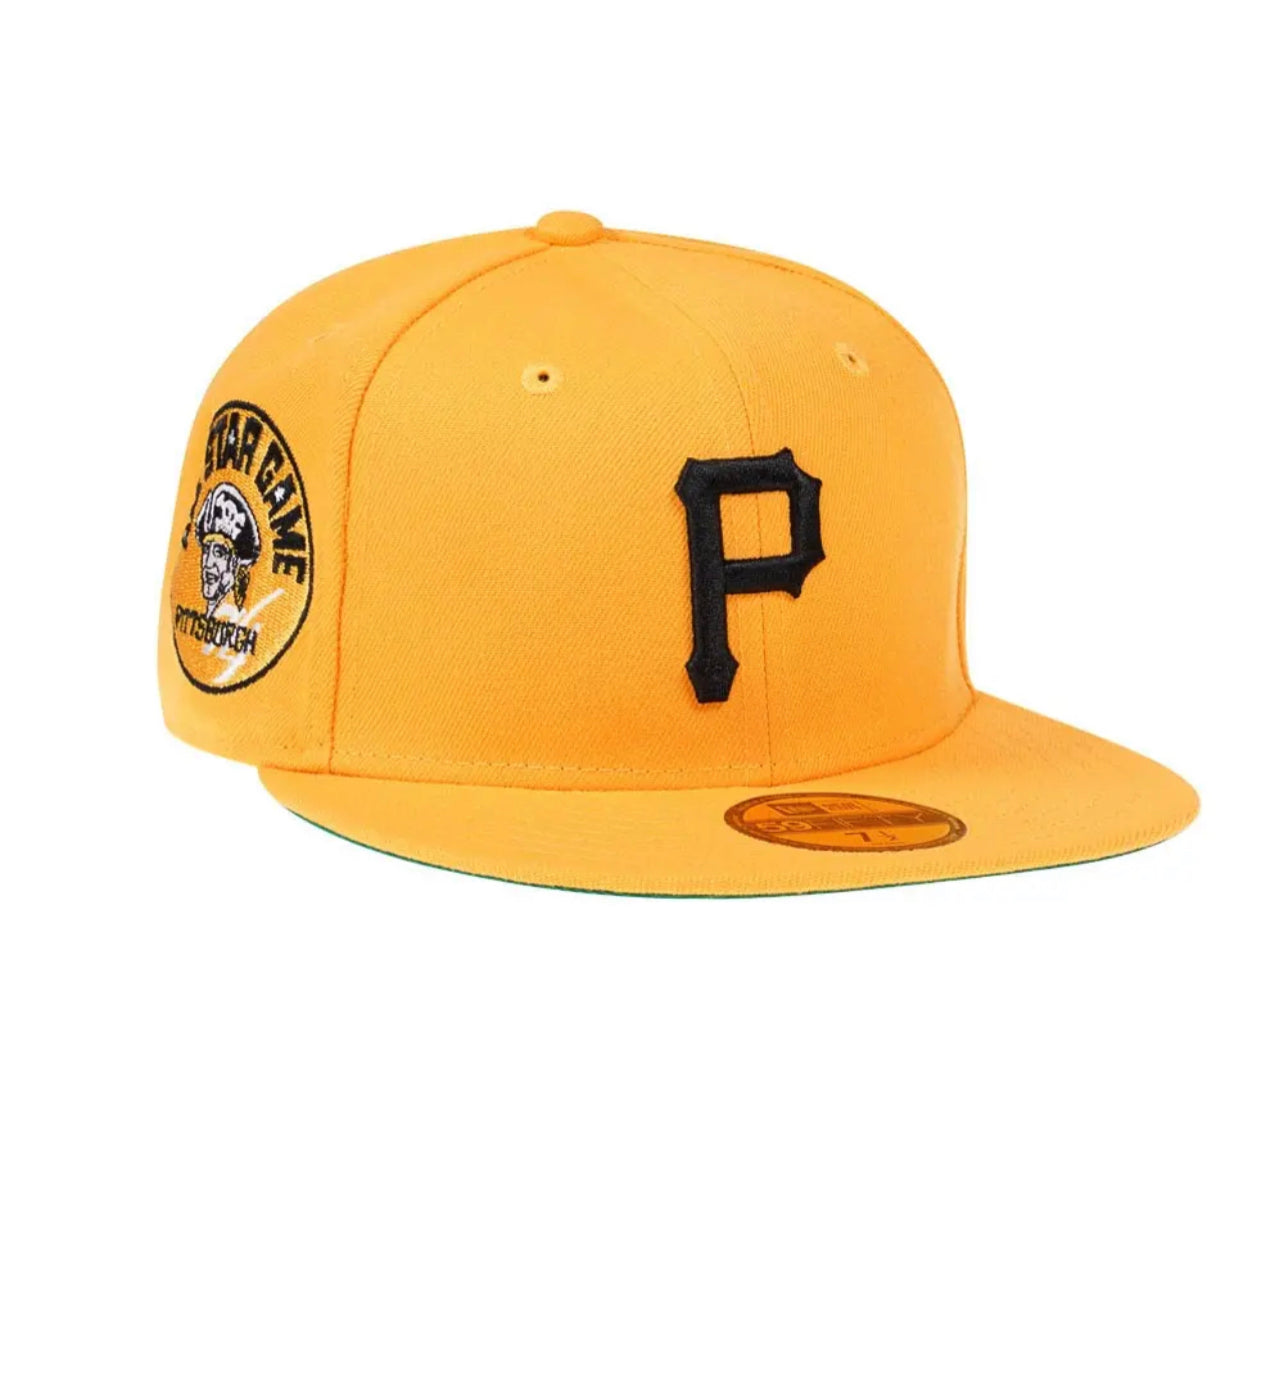 NEW ERA PITTSBURGH PIRATES ALL STAR GAME 1974 THROWBACK EDITION 59FIFT –  wtlshop